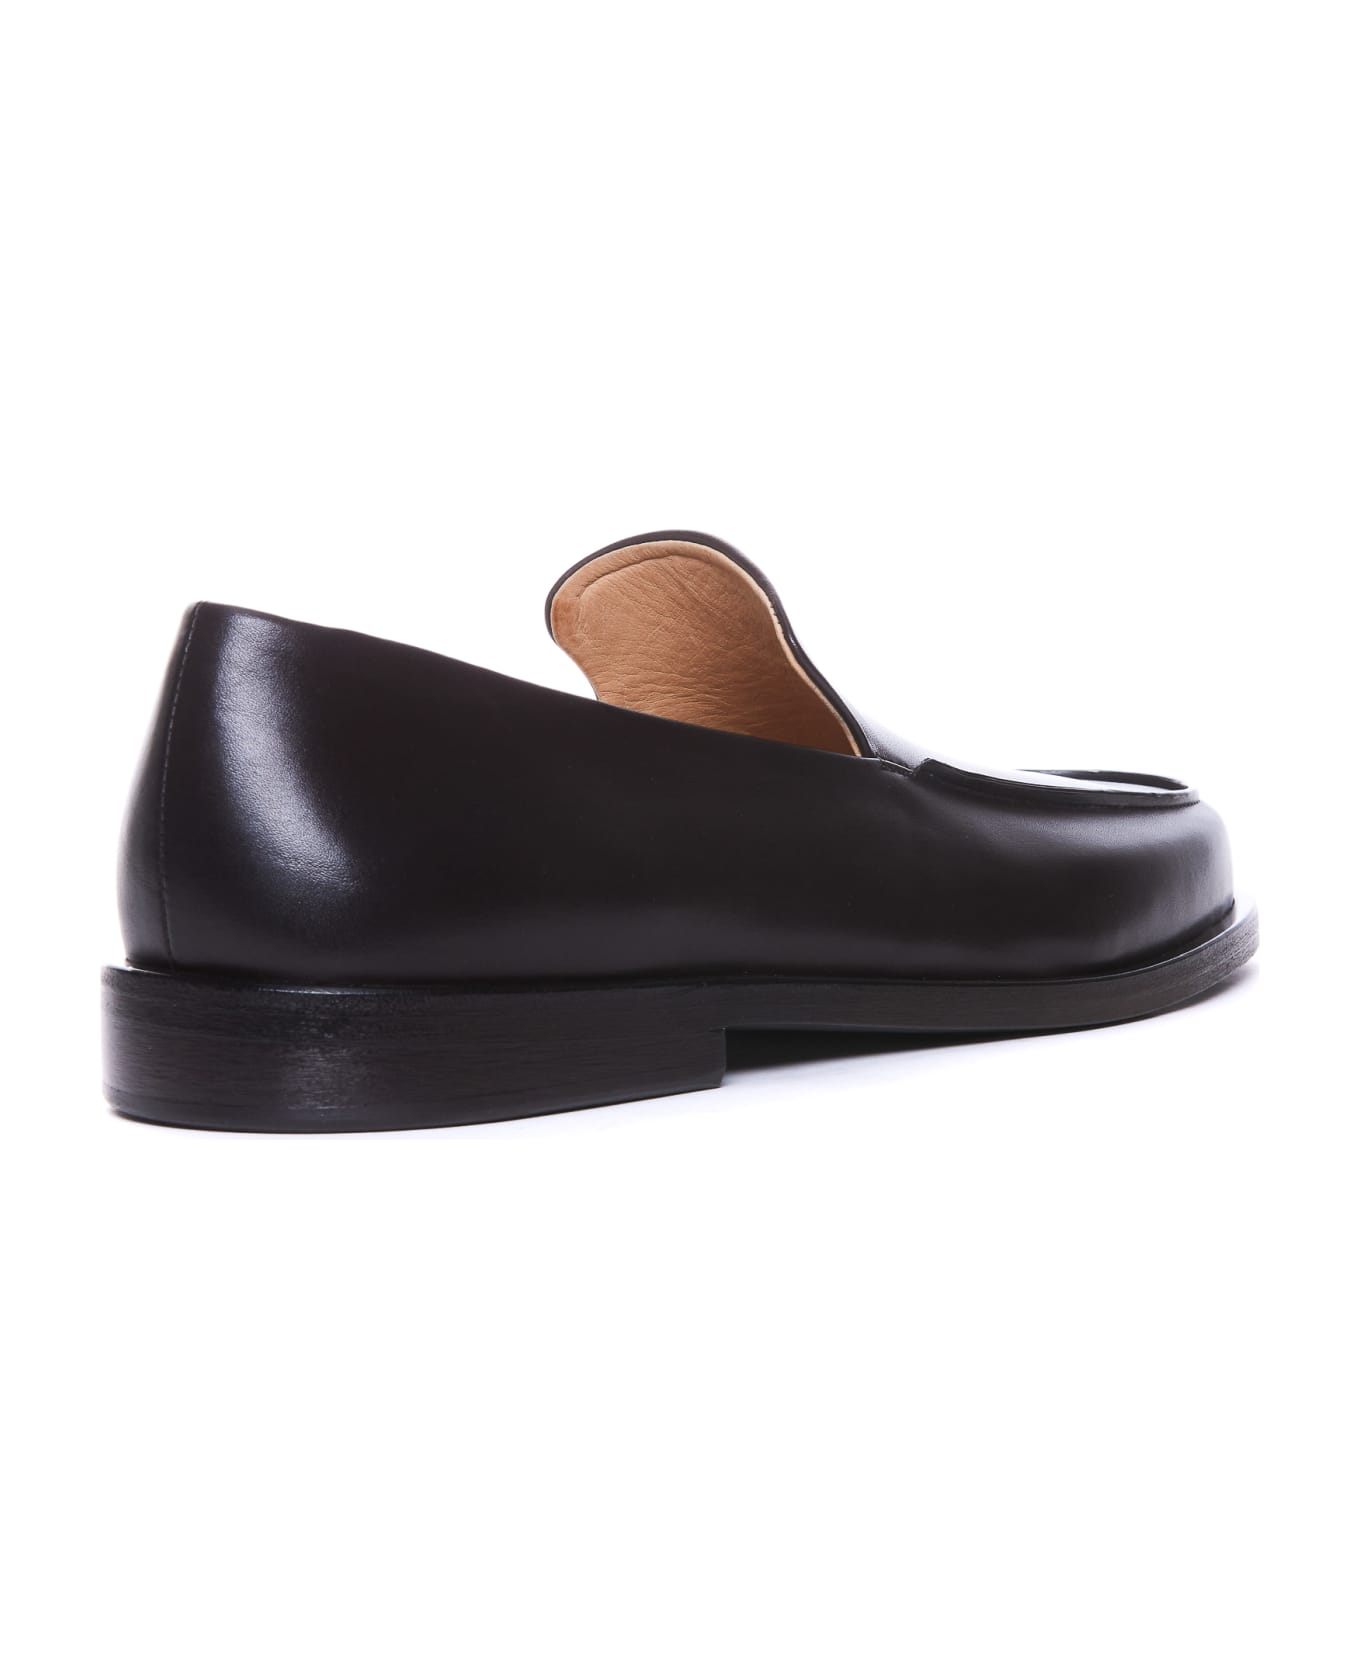 Marsell Loafers - Brown